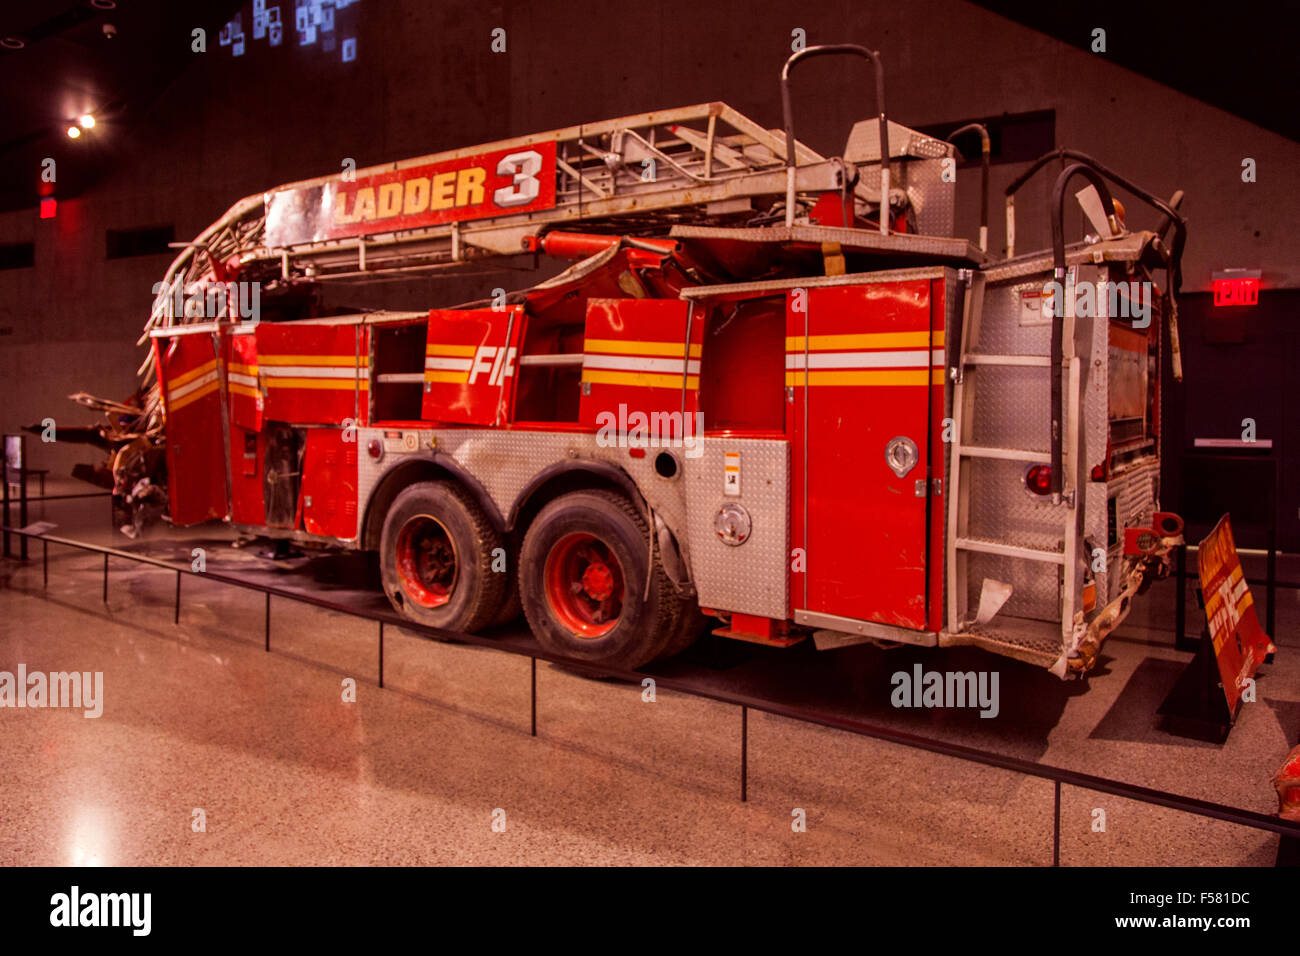 Crushed fire truck, ladder 3, National September 11 Memorial & Museum 9/11, New York City, United States of America. Stock Photo